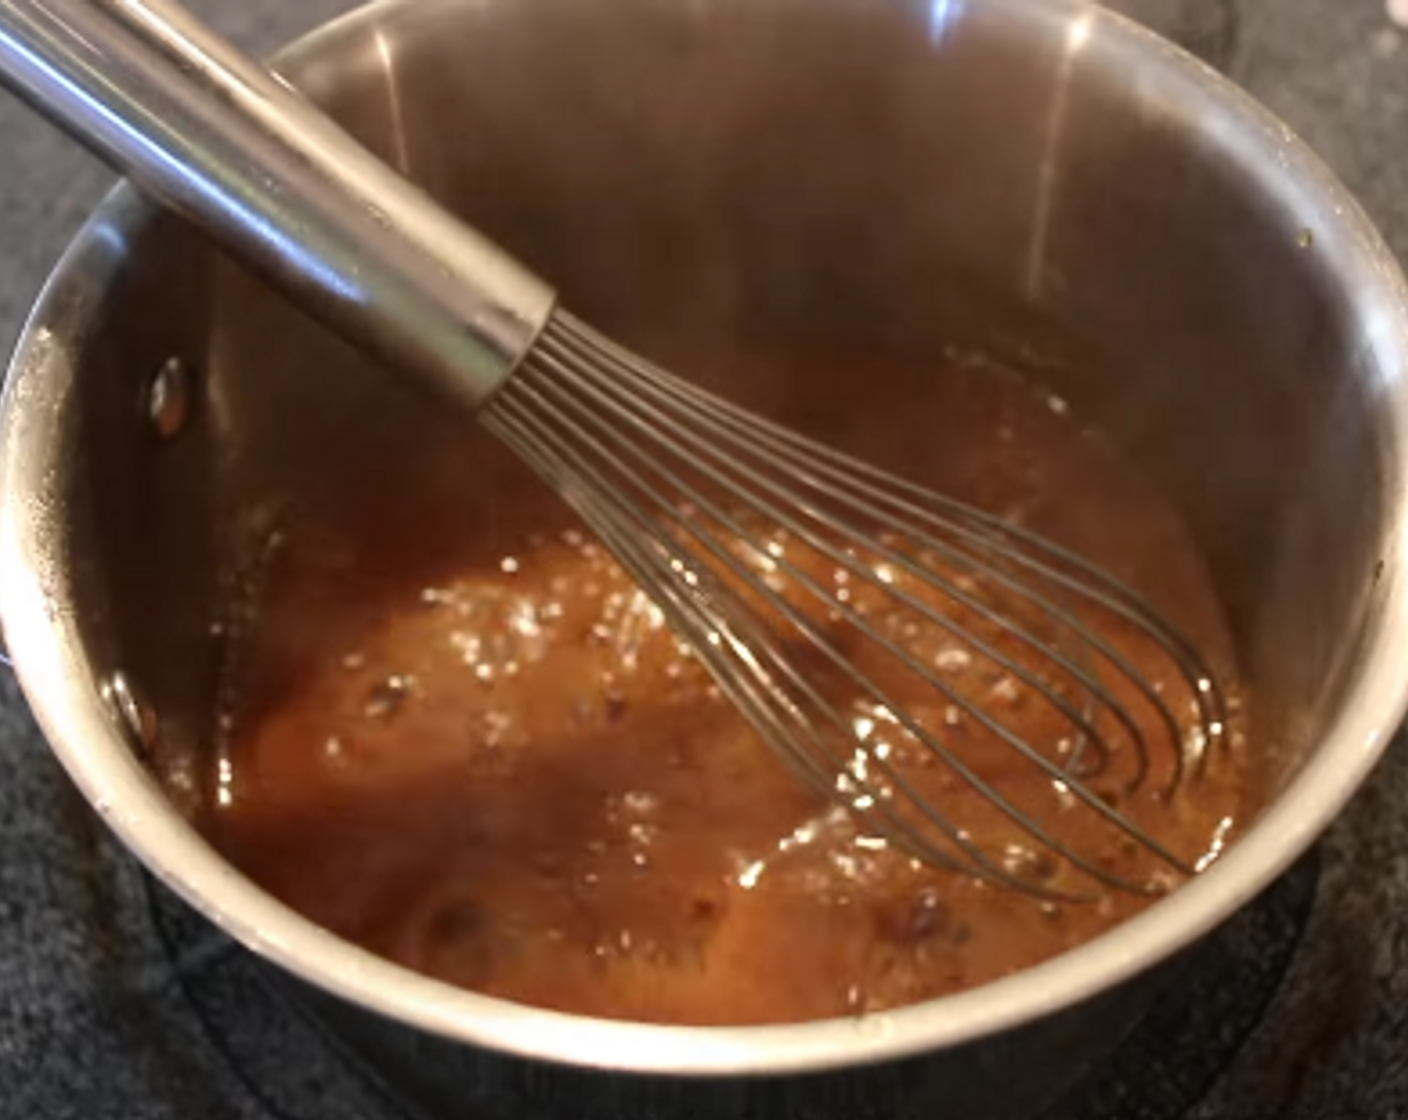 step 4 While ham is smoking, mix up your Maple Glaze by combining Maple Syrup (1/4 cup), Dark Brown Sugar (1/4 cup), Brown Sugar (1/4 cup), Honey Dijon Mustard (2 Tbsp) and Apple Juice (2 Tbsp) over medium heat. Bring the mixture to a simmer and reduce until it thickens.